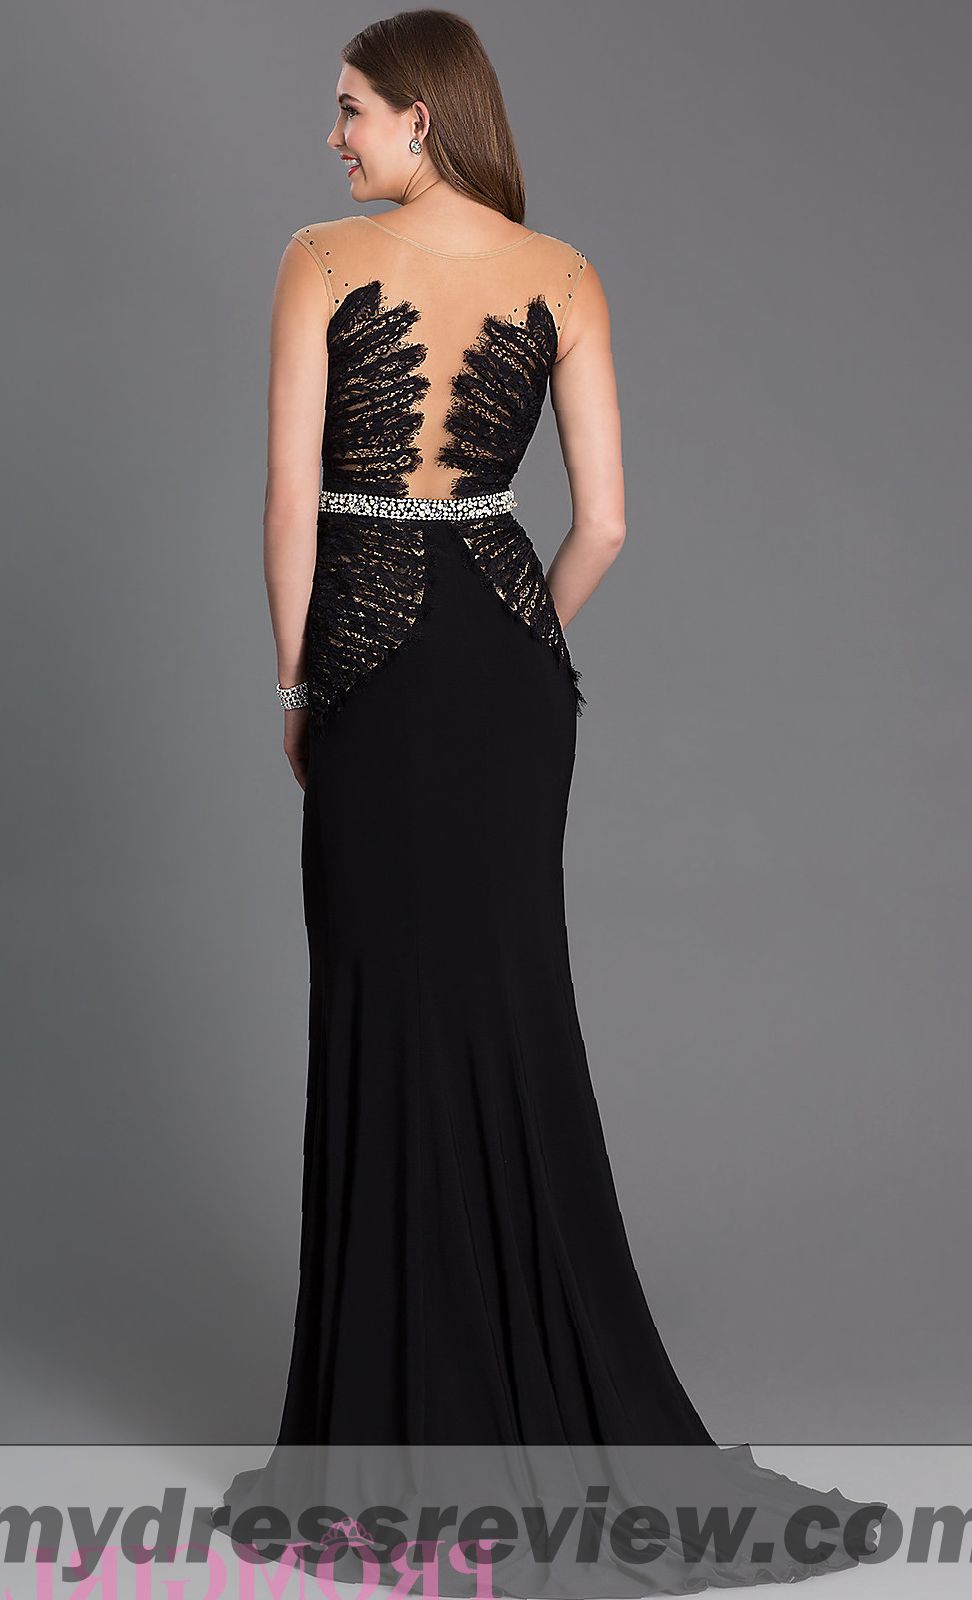 Sleeveless Floor Length Dress With Sequin Embellished Bodice - Review Clothing Brand